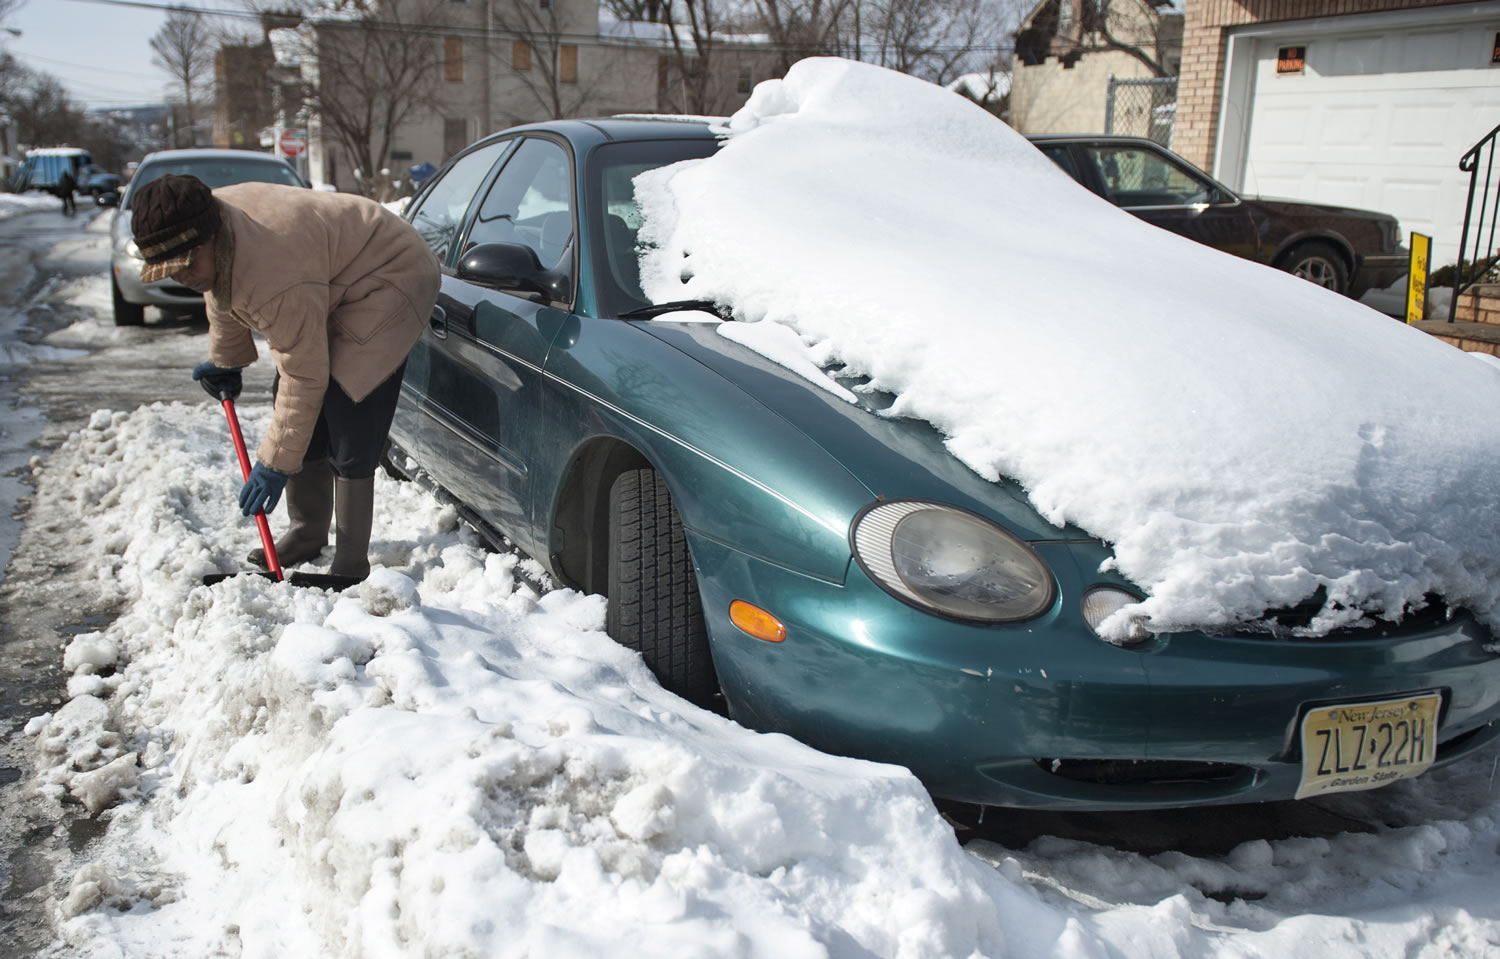 Ingrid Parham chisels away at snow surrounding her car Sunday in Paterson, N.J., in preparation for work today.